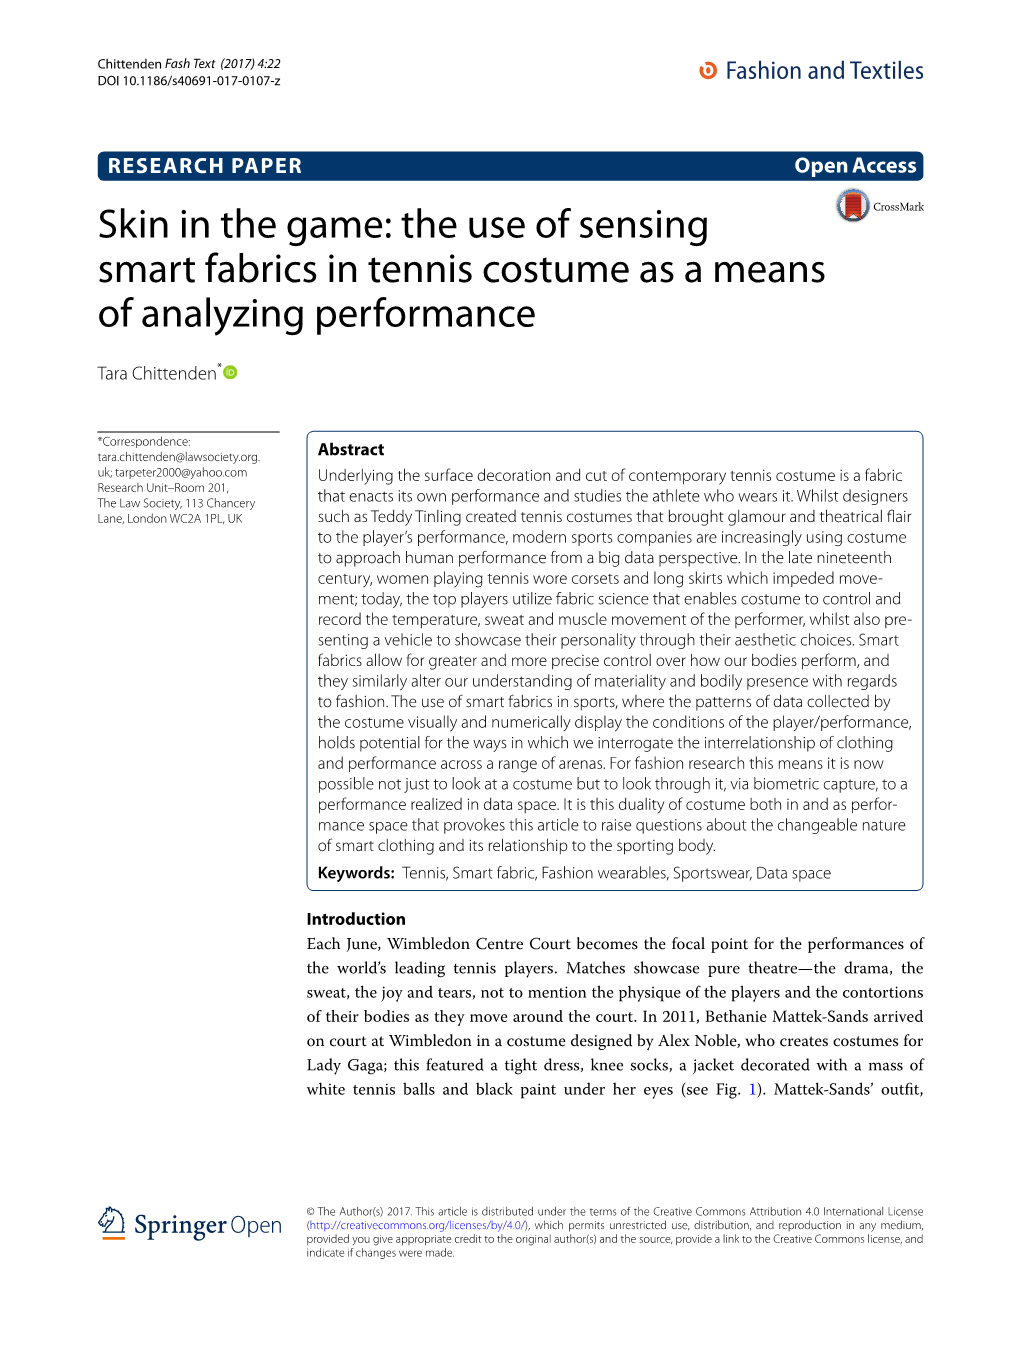 Skin in the Game: the Use of Sensing Smart Fabrics in Tennis Costume As a Means of Analyzing Performance